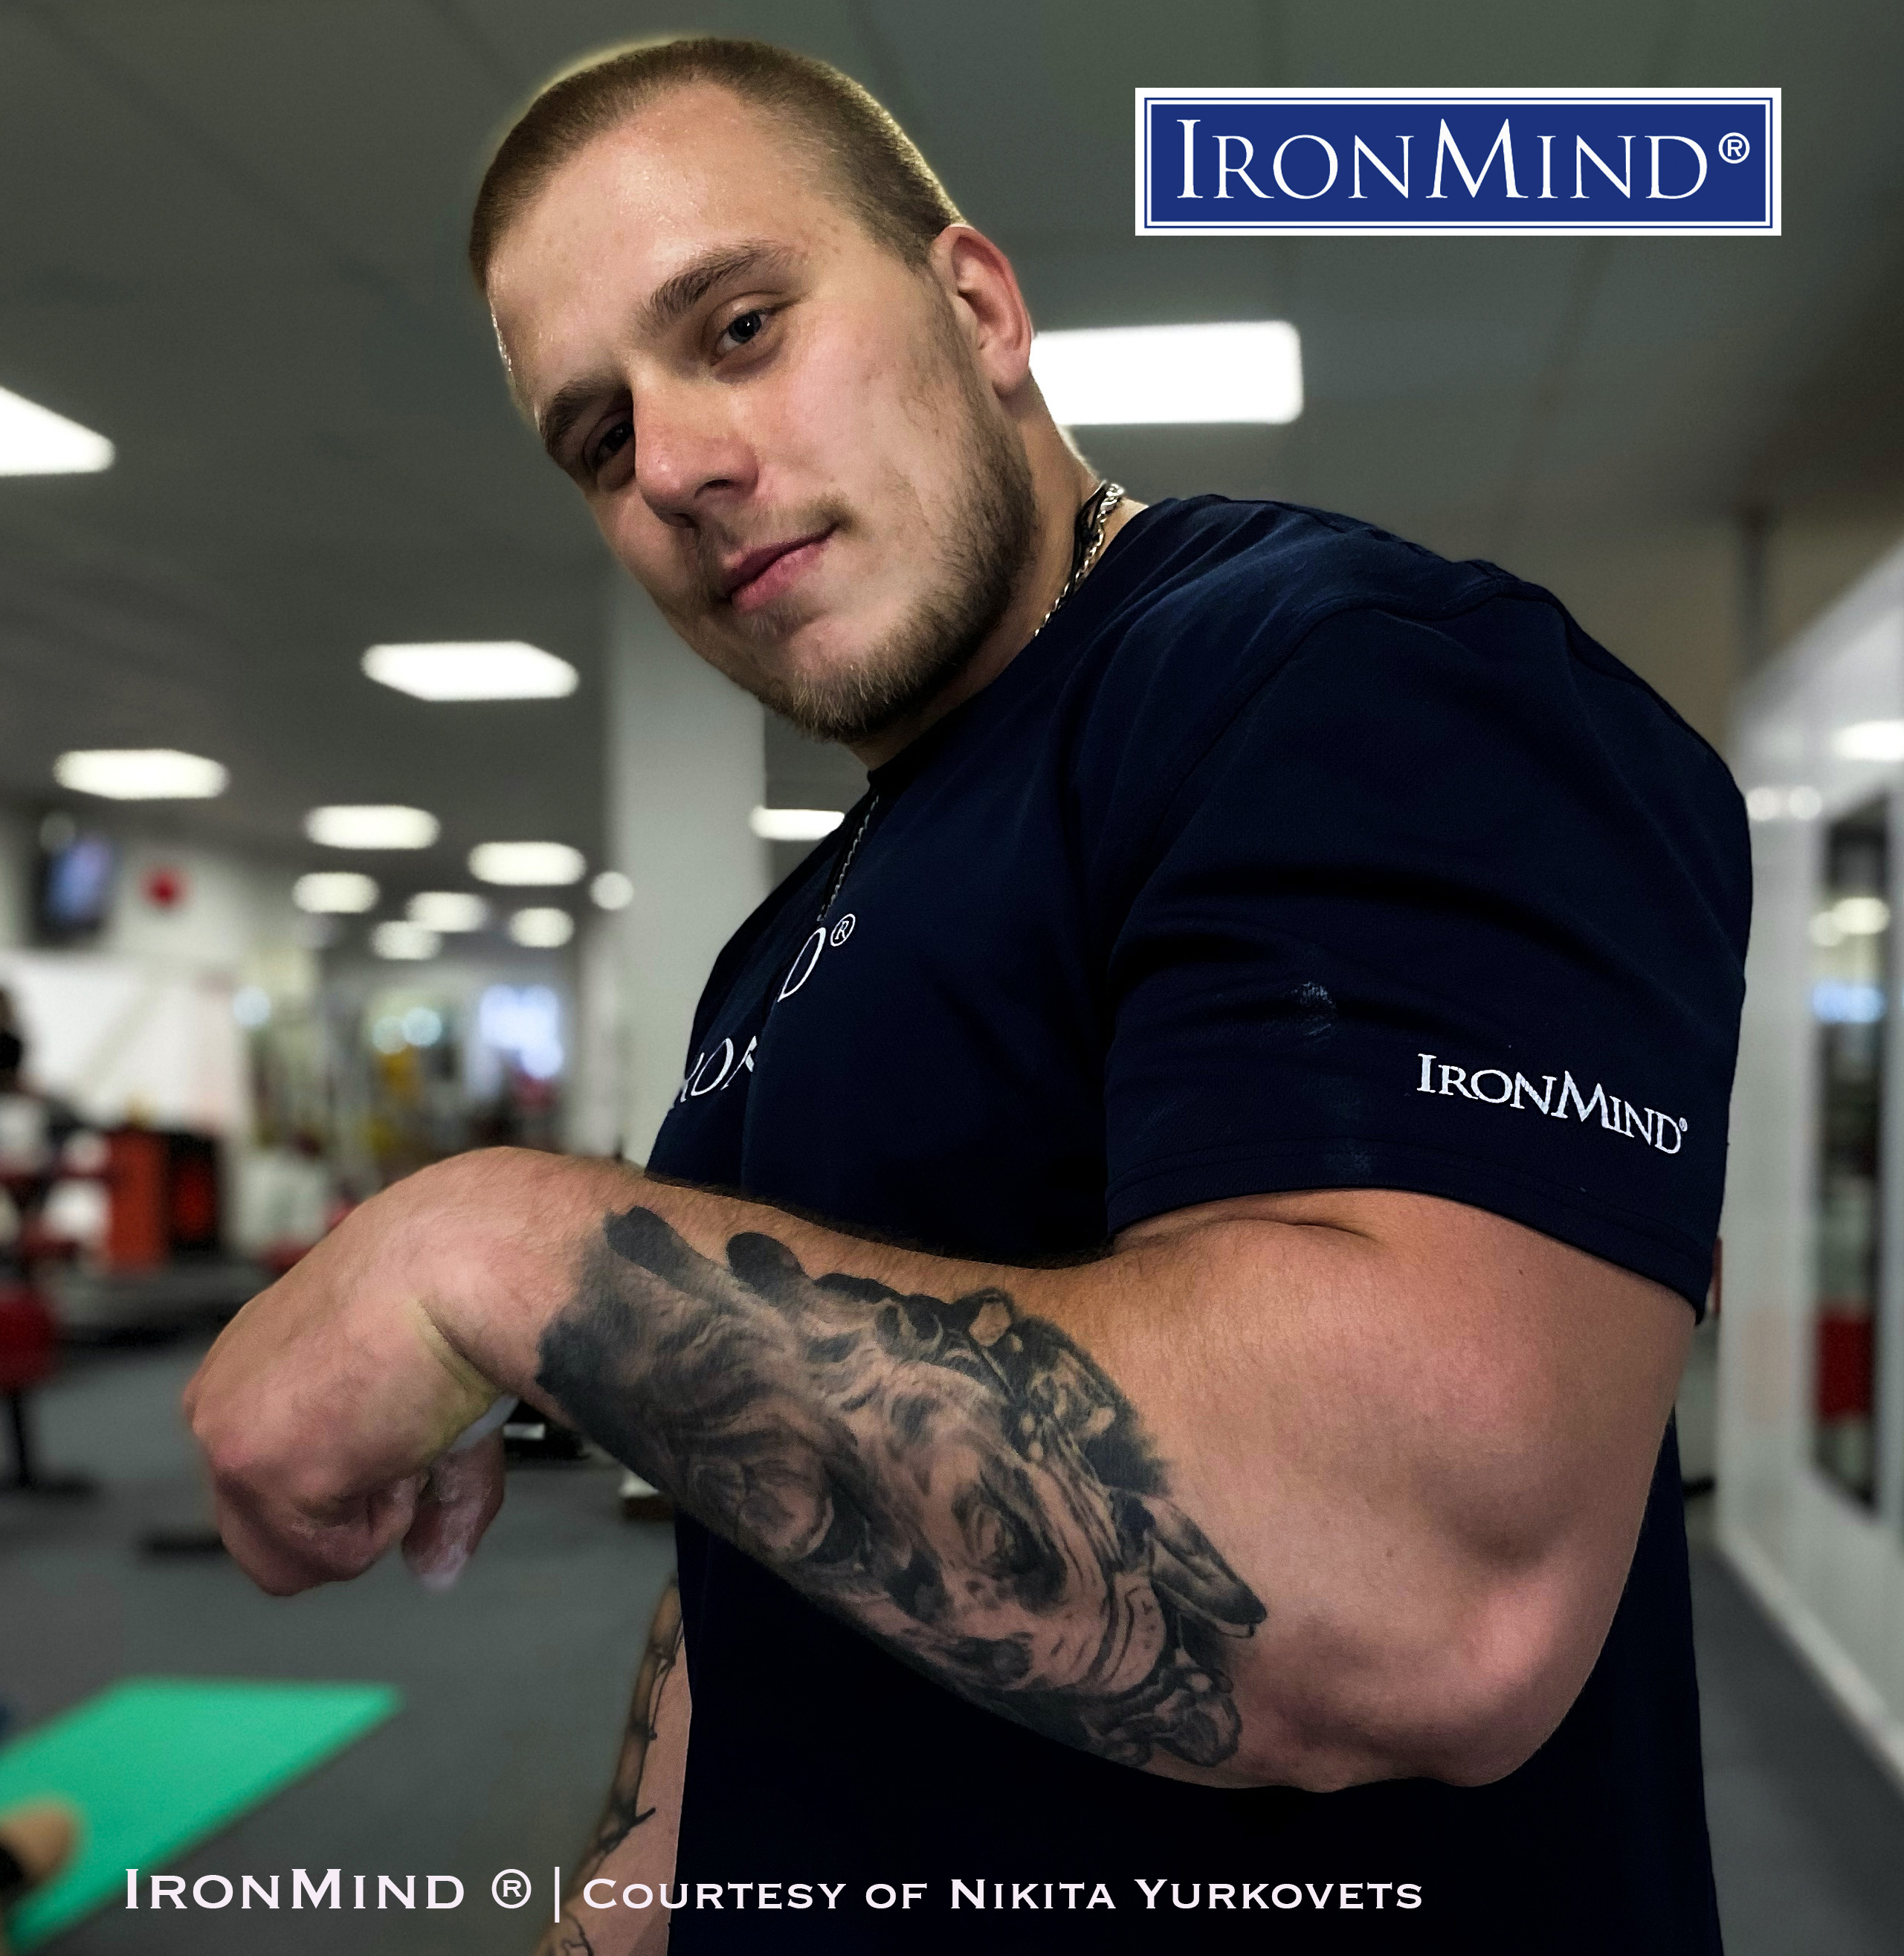 Nikita Yurkovets (Belarus) just added to his rarified status in the grip strength world by certifying on the IronMind Crushed-To-Dust Plus Challenge (CTD+), a test of all-around world class grip strength. And although the CTD+ “only” requires closing a Captains of Crush (CoC) No. 3 gripper as one of its elements, Yurkovets did it with a CoC No. 3.5! ©IronMind Enterprises, Inc. Photo courtesy of Nikita Yurkovets